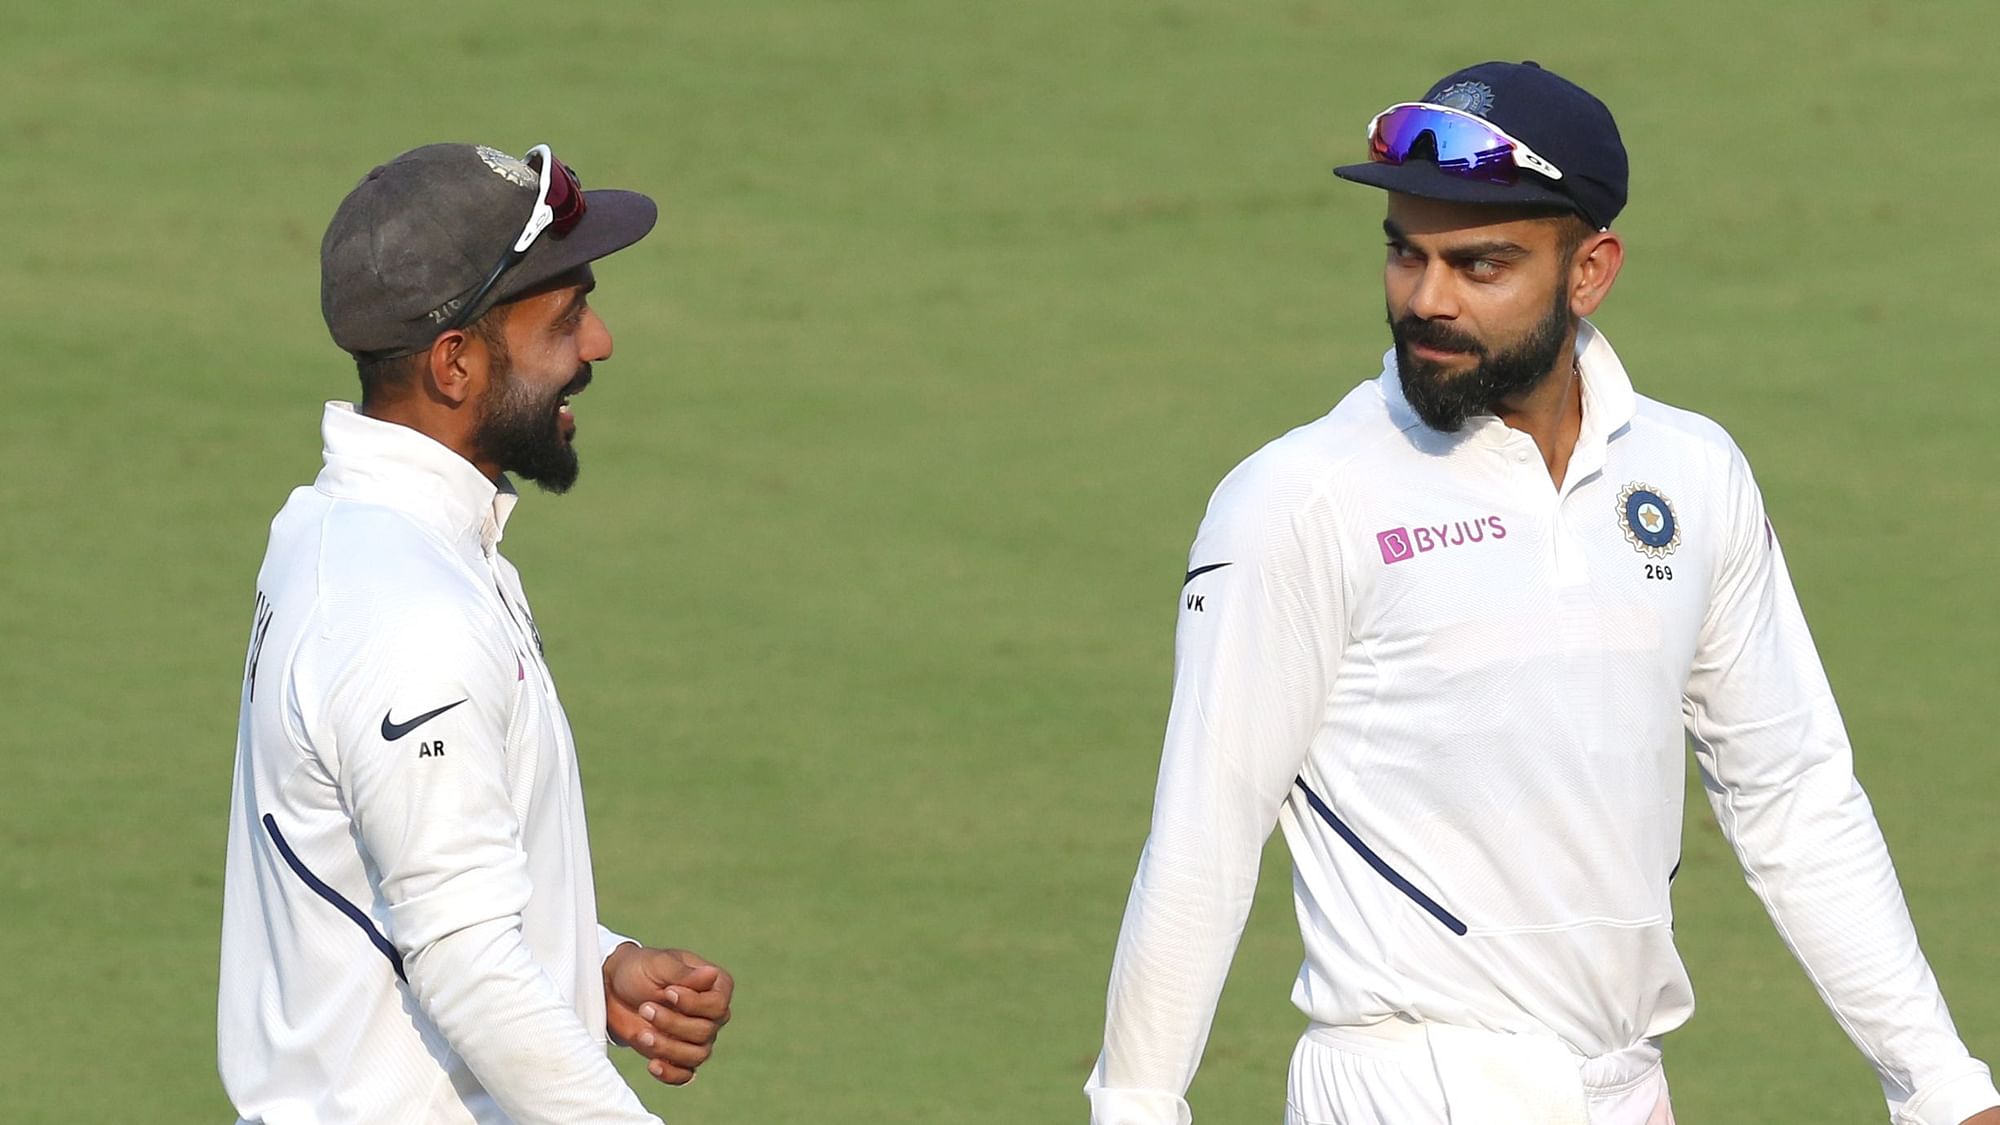 Ajinkya Rahane is captaining India for the final 3 Tests of the Border-Gavaskar trophy after Virat returned home to India.